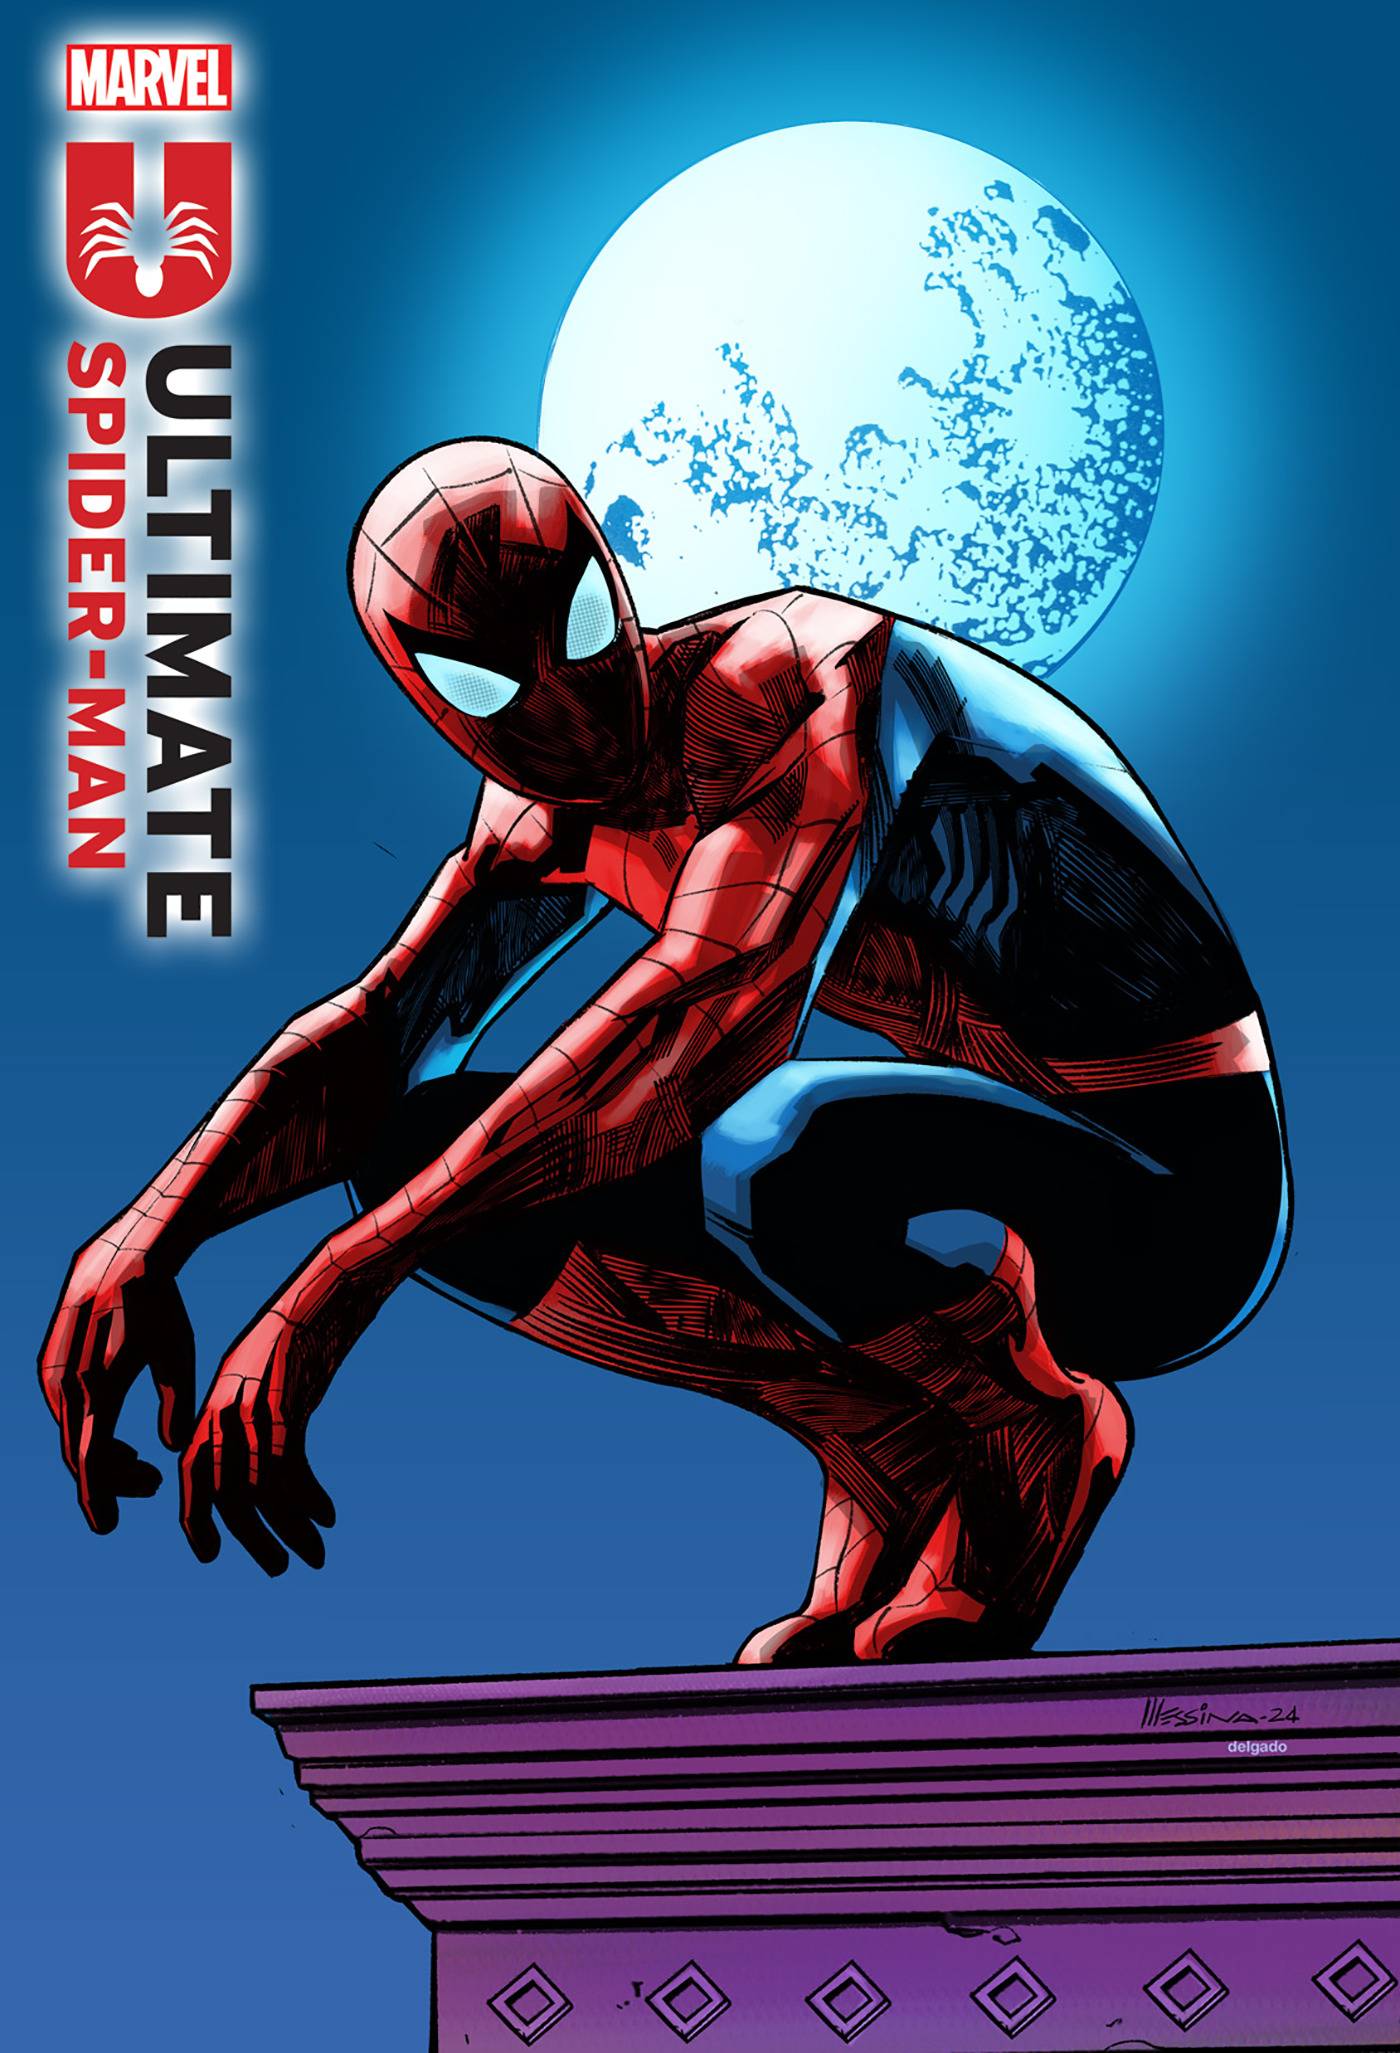 Ultimate Spider-Man #5 1:25 MARVEL Messina Release 05/29/2024 | BD Cosmos